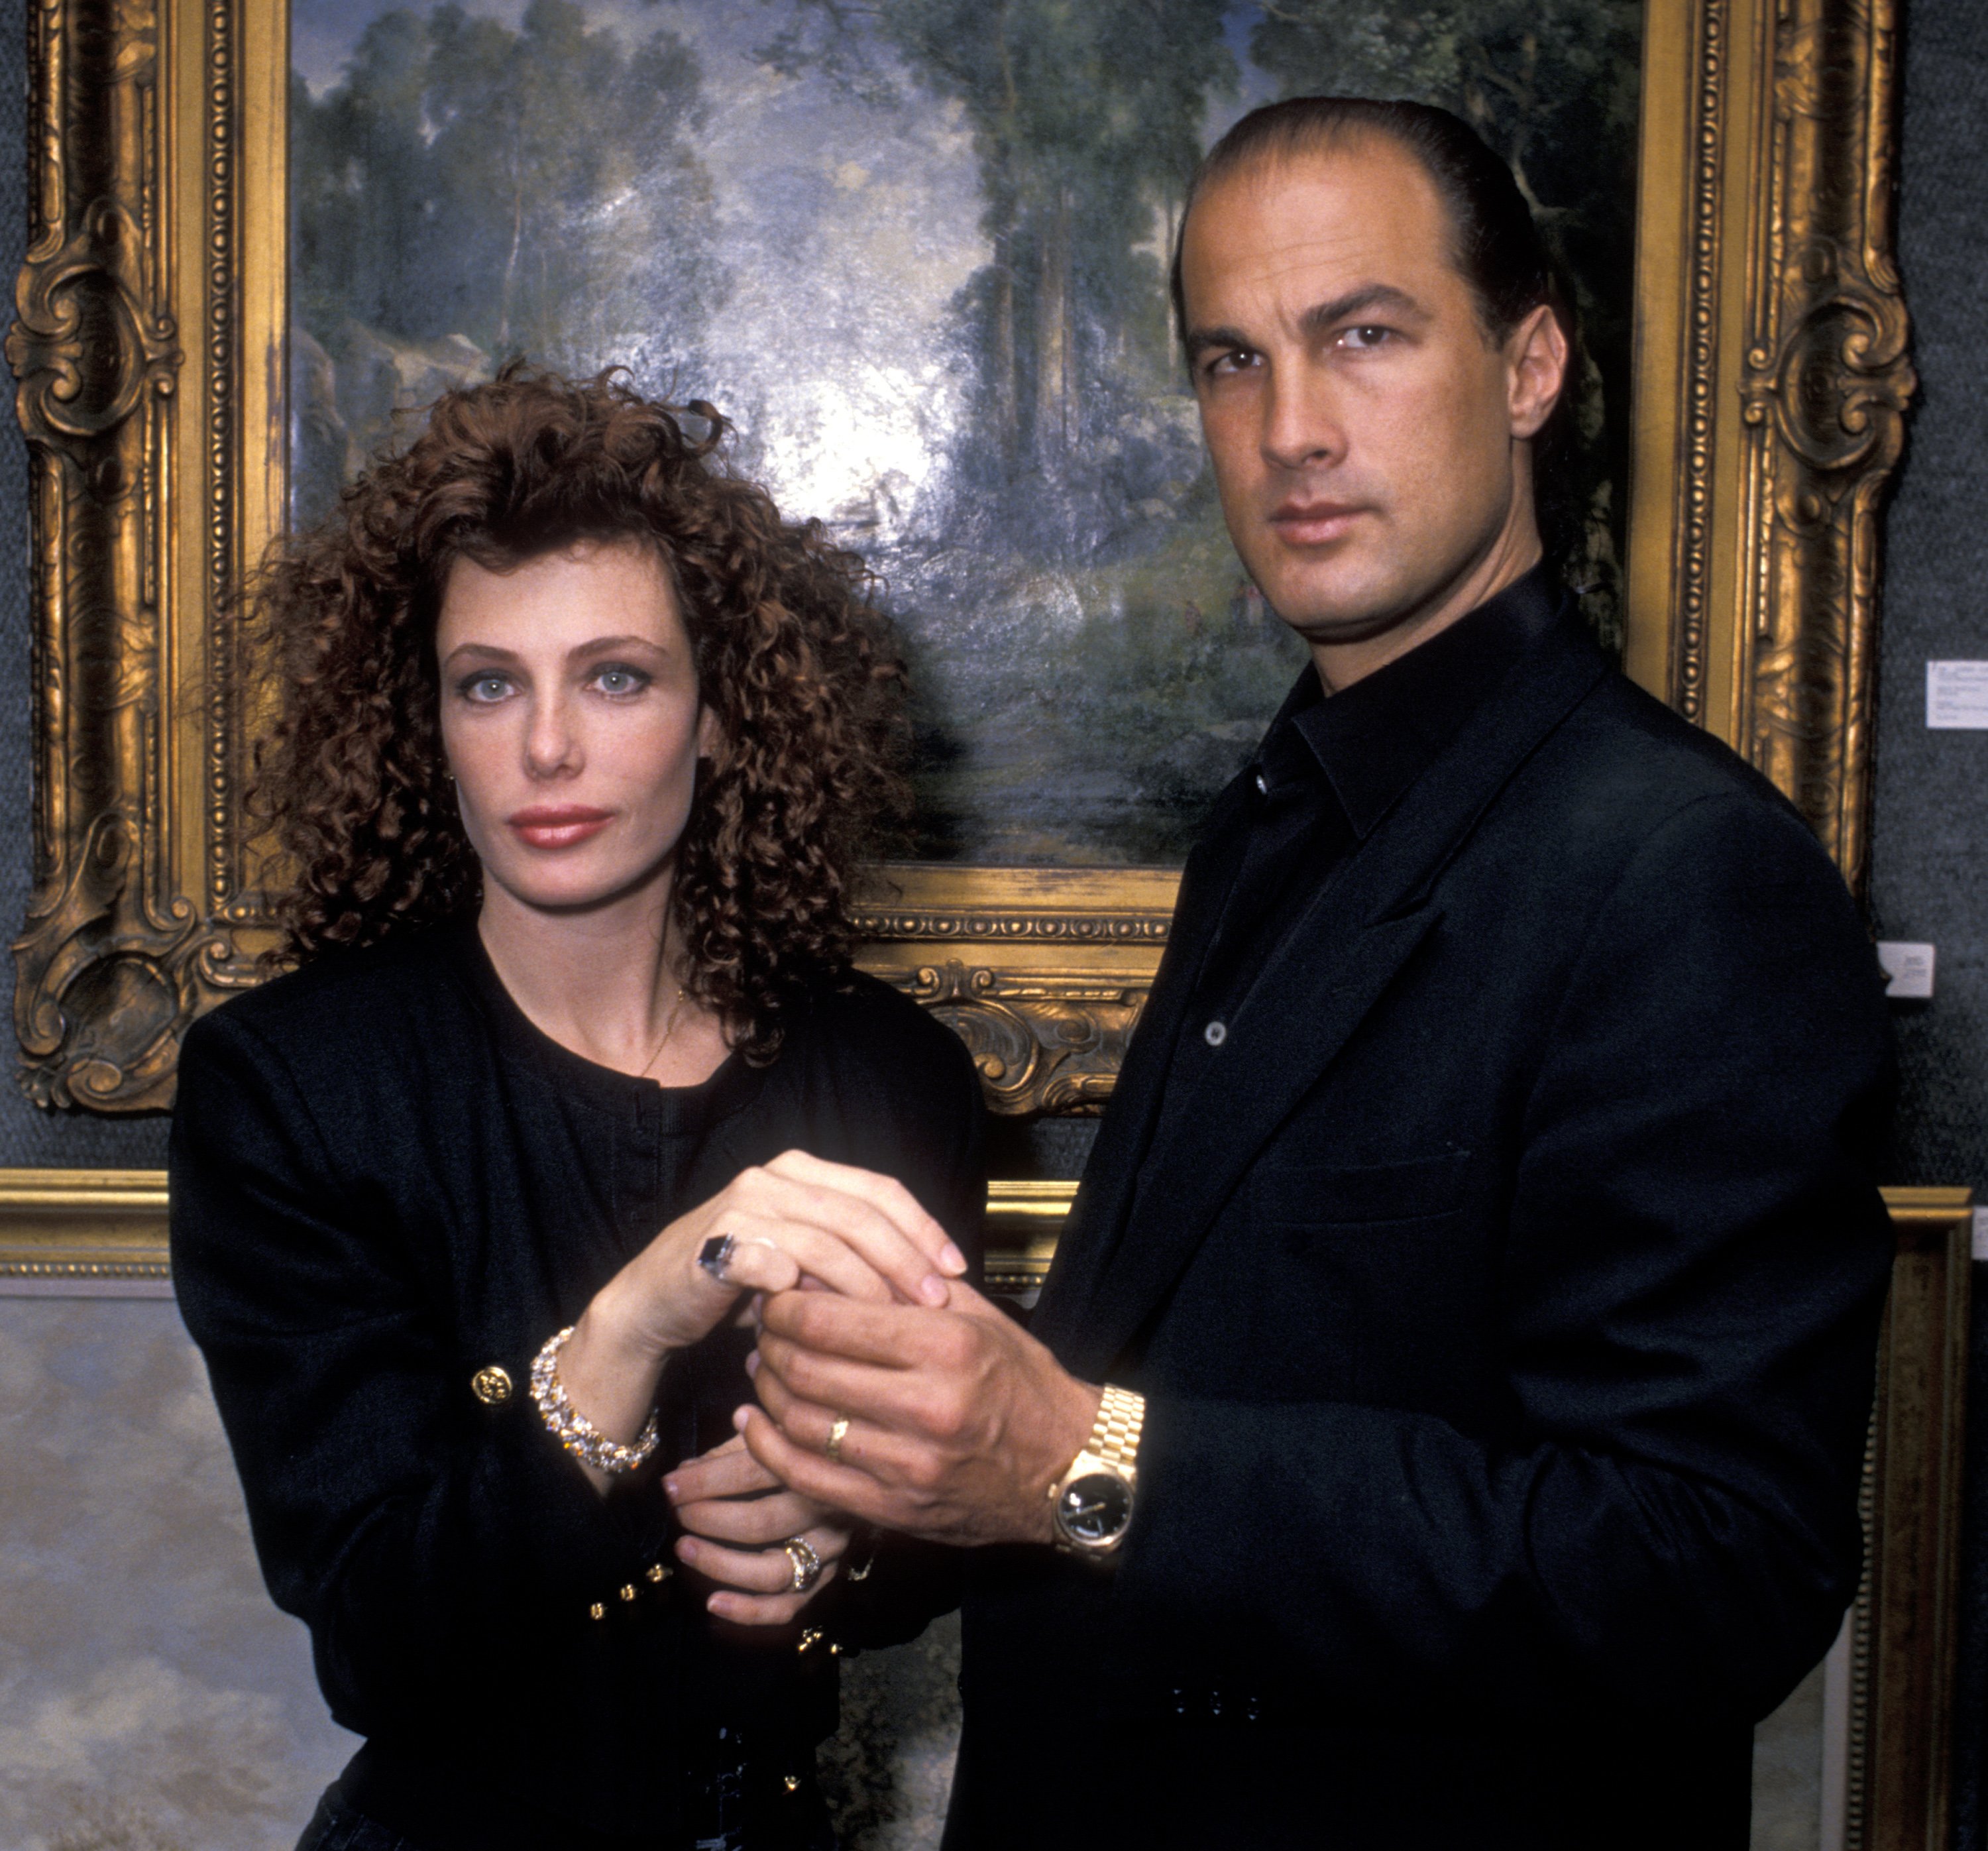 Actor Steven Seagal and his wife model Kelly LeBrock at Butterfields in Los Angeles California on November 3, 1988. | Source: Getty Images